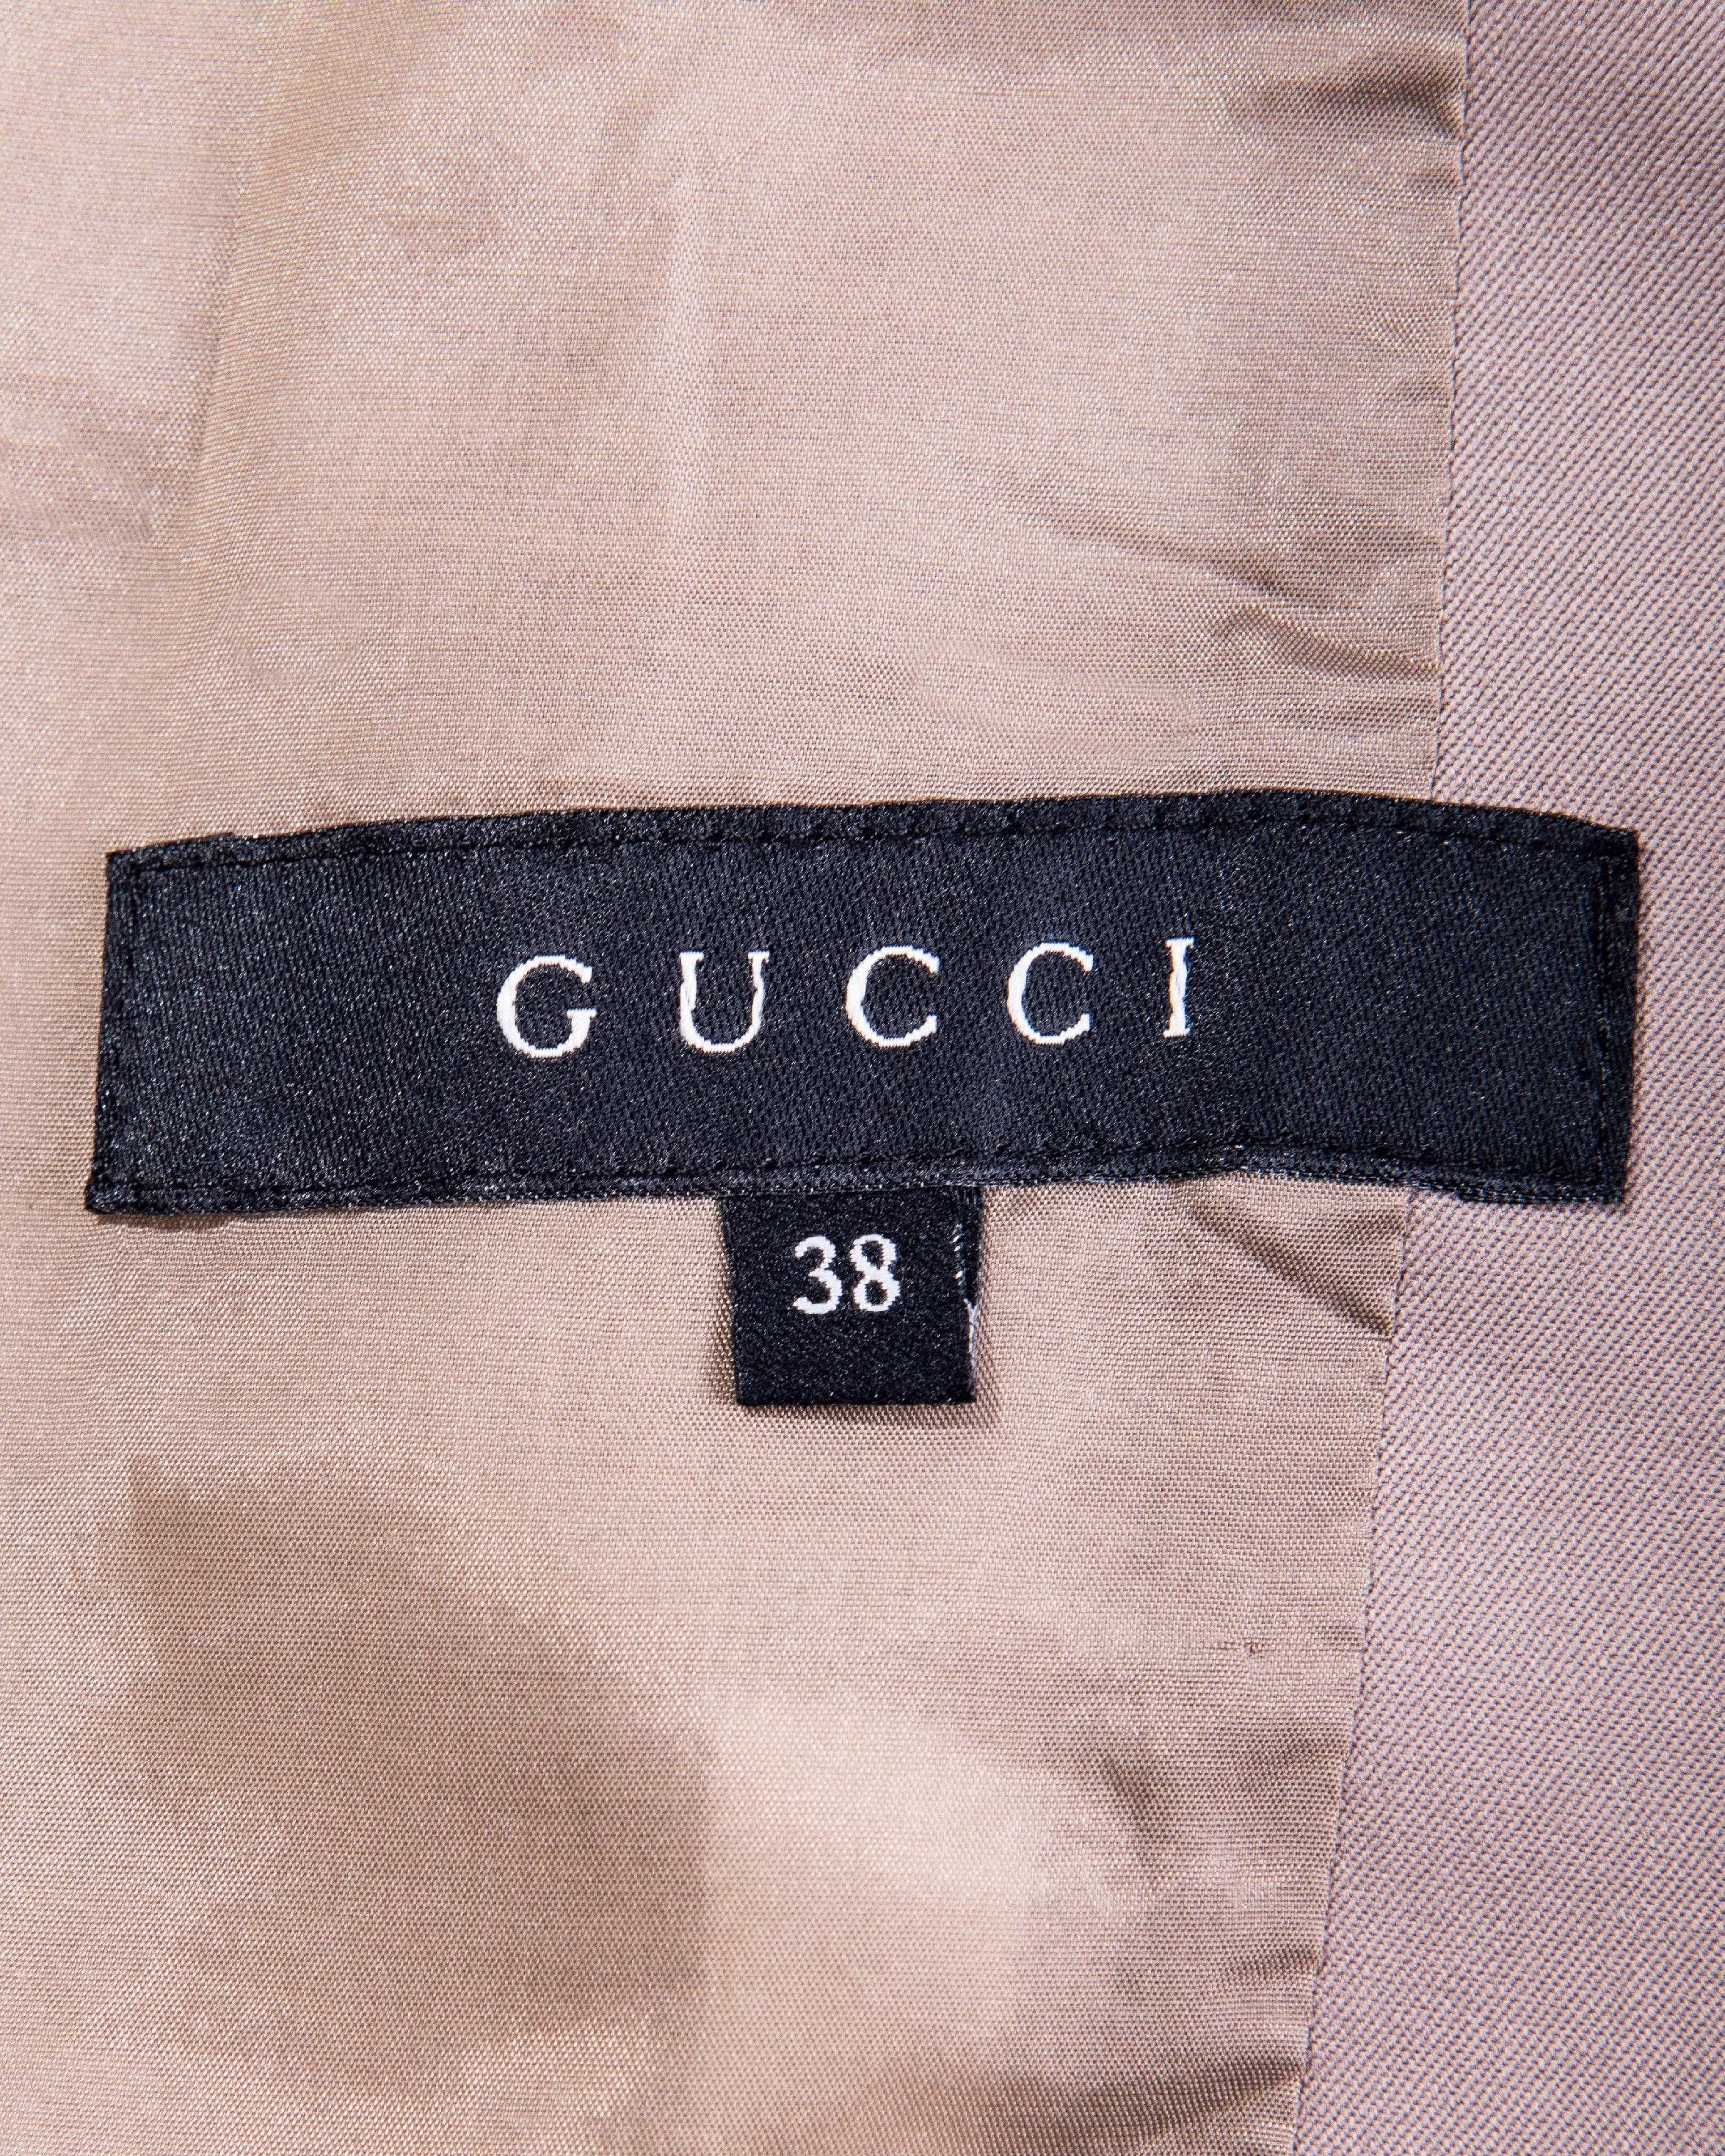 c. 2004 Gucci by Tom Ford Beige Pant Suit 5